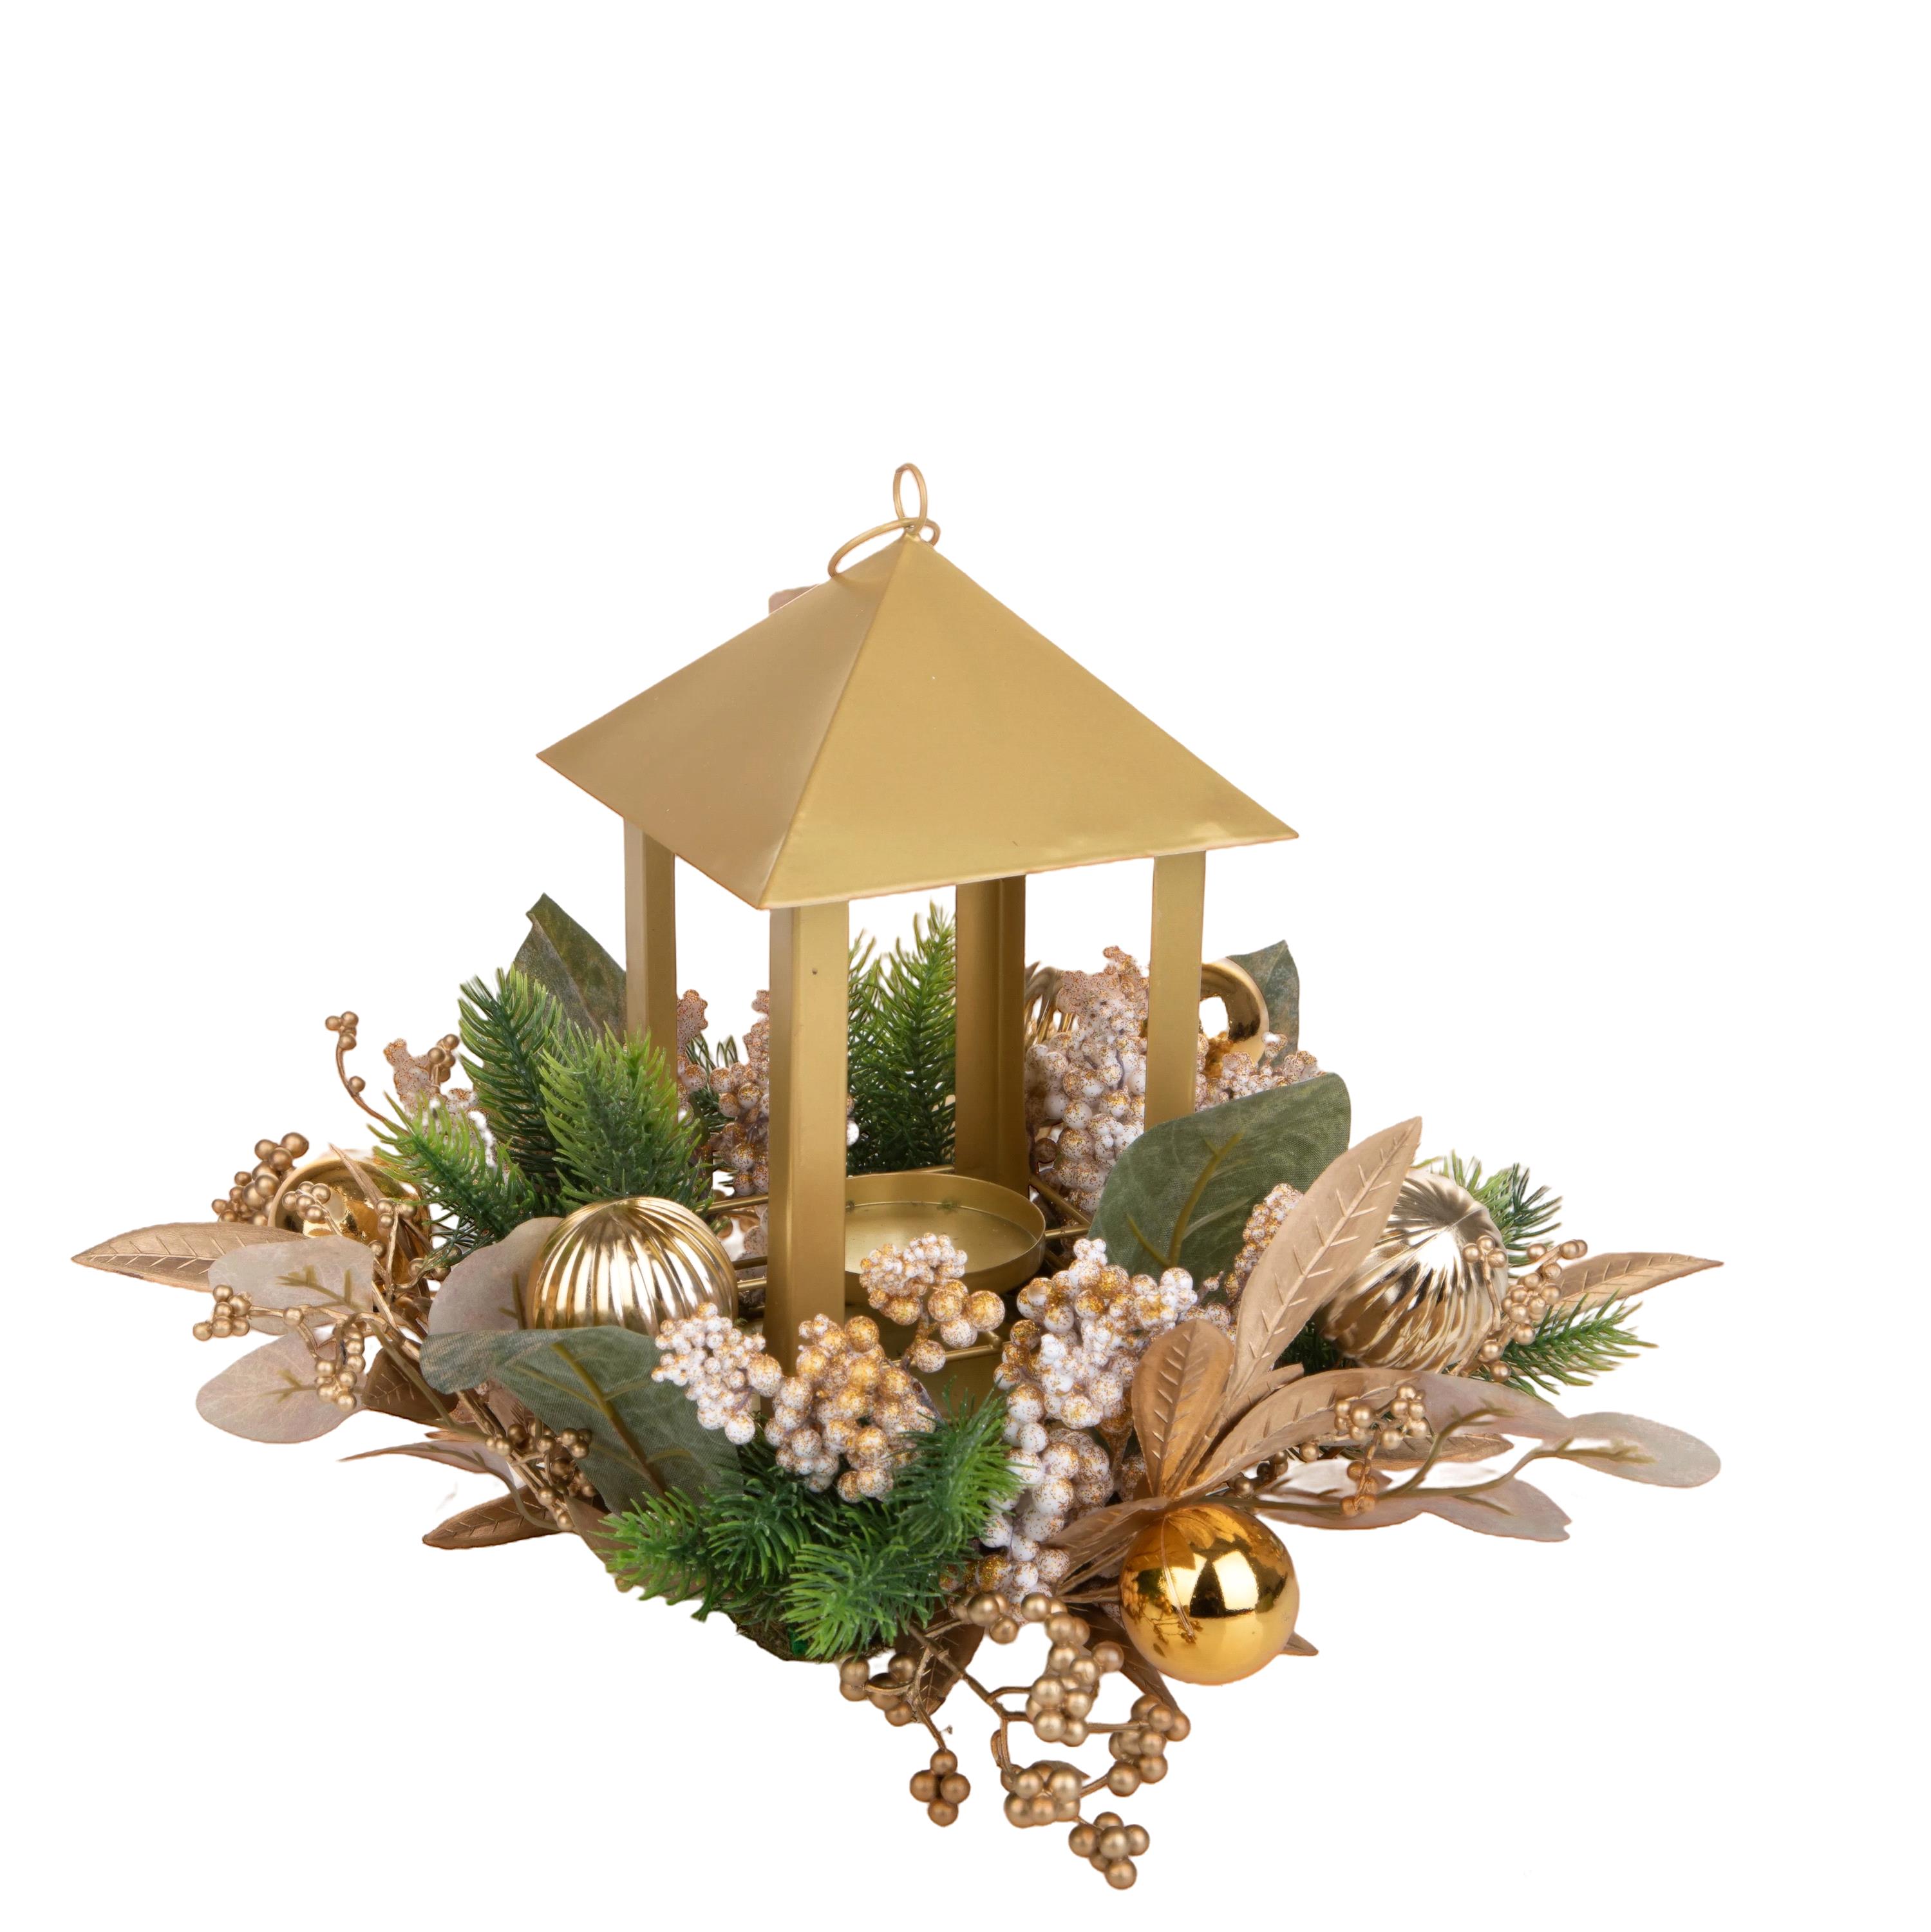 NATURAL PRODUCTS DRIED FLOWERS AND ERBS,Cones and fruits with stem,C/TAVOLA 30XH32 CM C/LANTERNA GOLD BALL